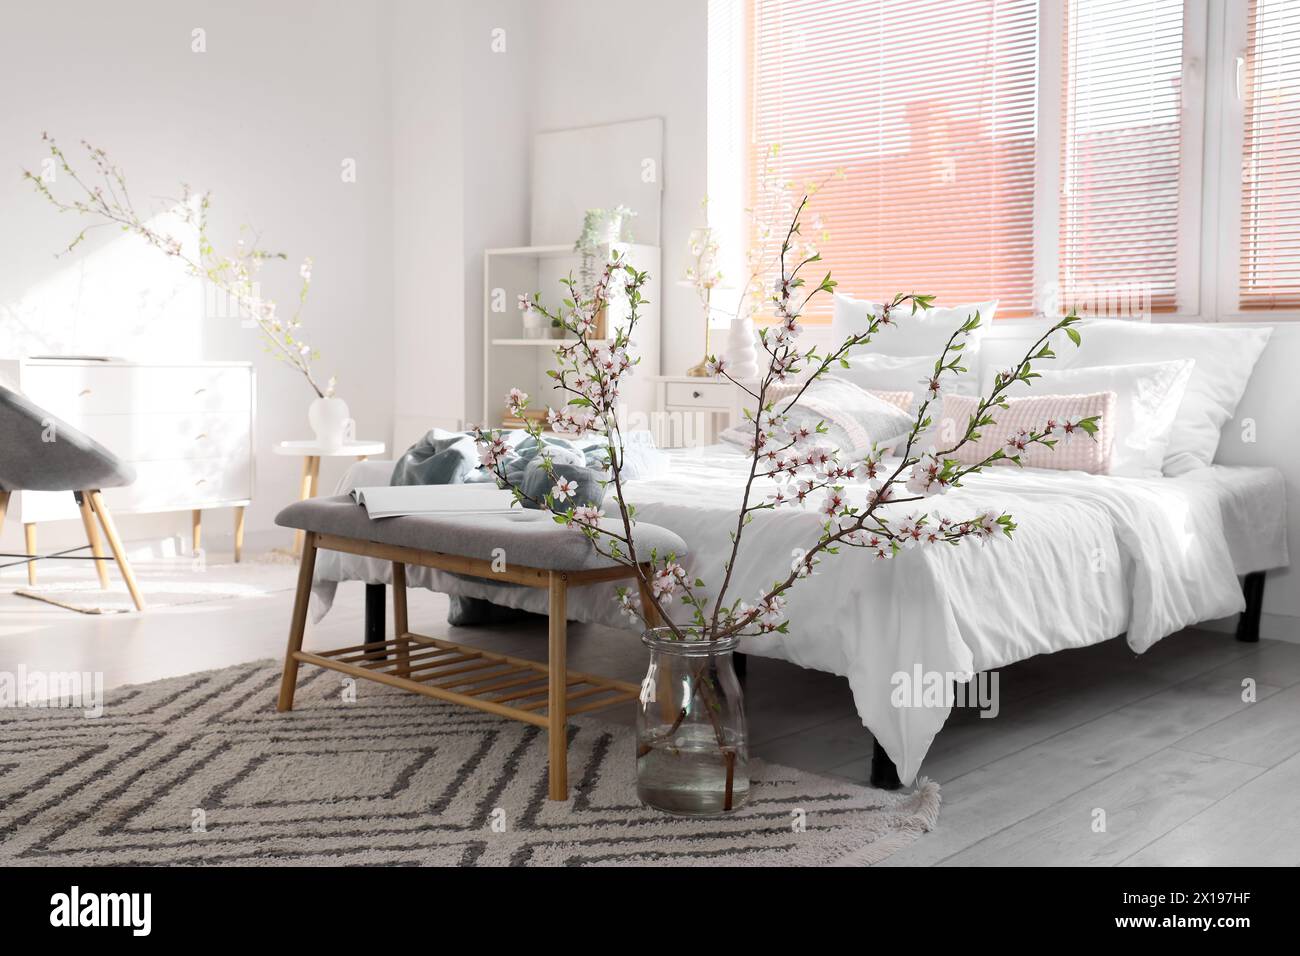 Vase with blooming branches on floor in interior of light bedroom Stock Photo